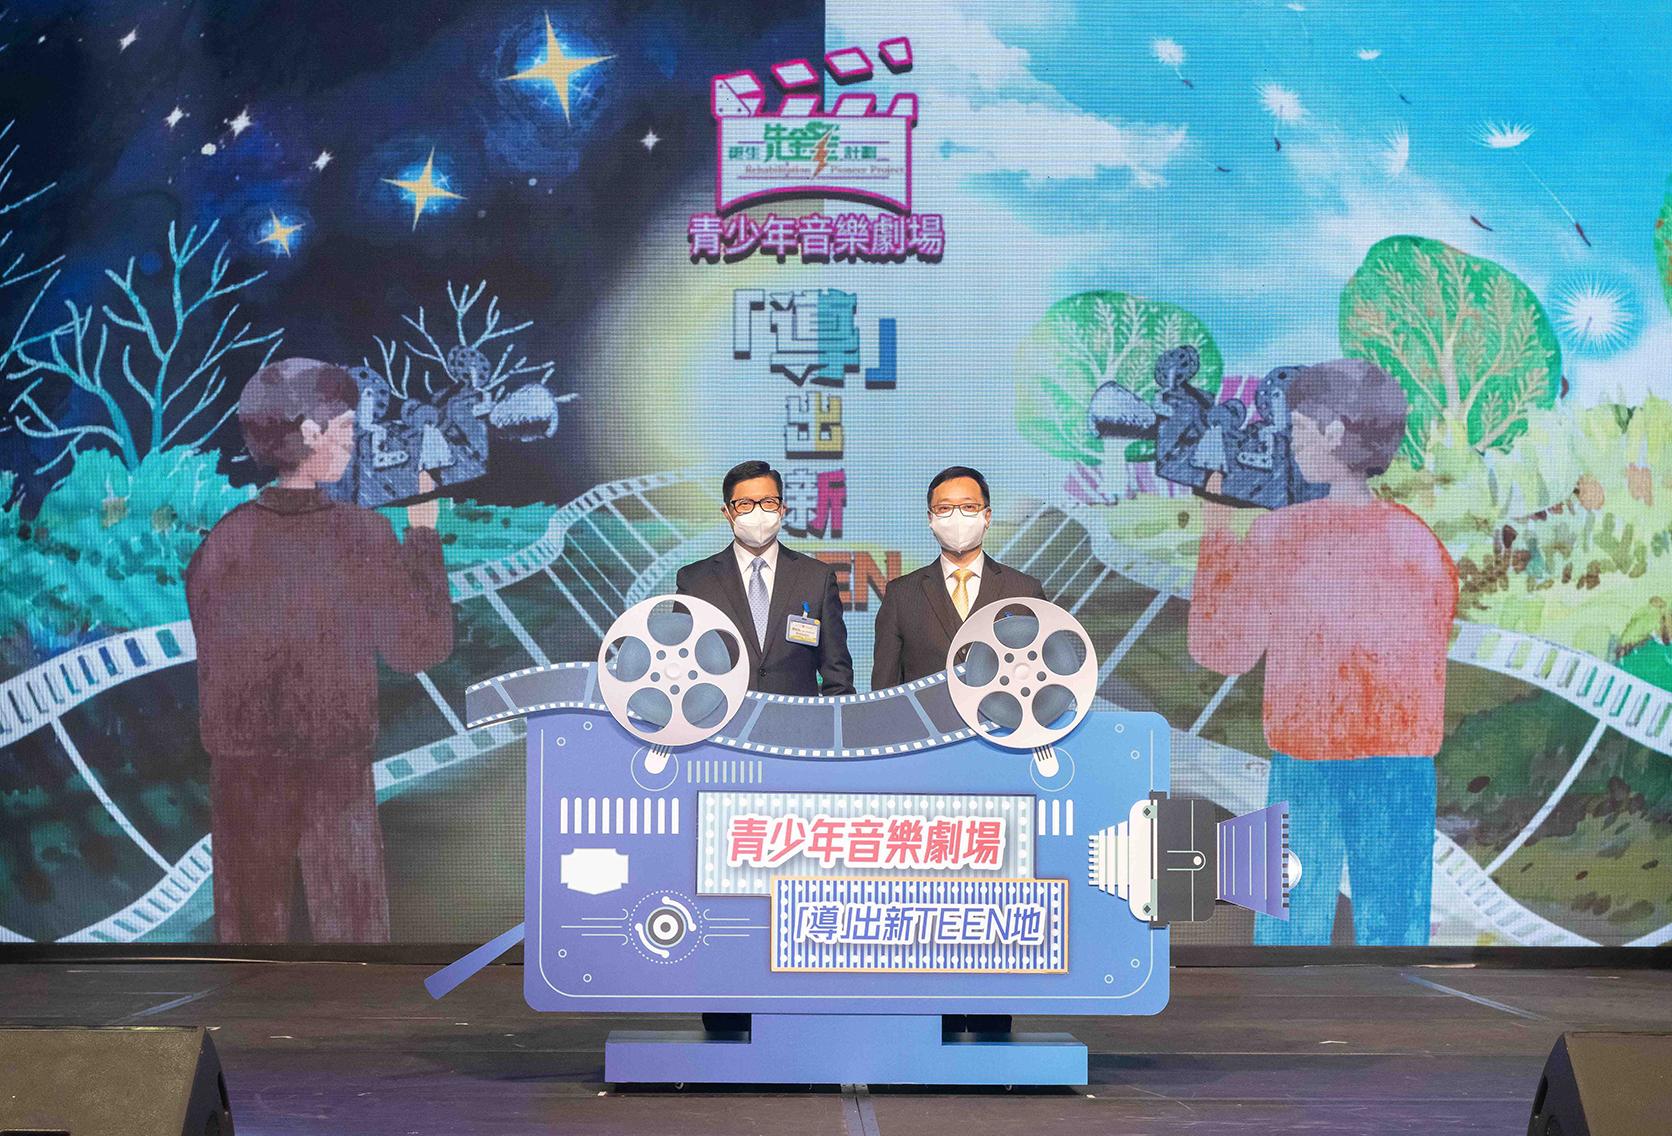 The Correctional Services Department today (December 16) staged a youth musical drama, “Direct Your Life”, to promote law-abiding and rehabilitation messages. Photo shows the Secretary for Security, Mr Tang Ping-keung (left), and the Commissioner of Correctional Services, Mr Wong Kwok-hing (right), officiating at the opening ceremony of the musical drama.